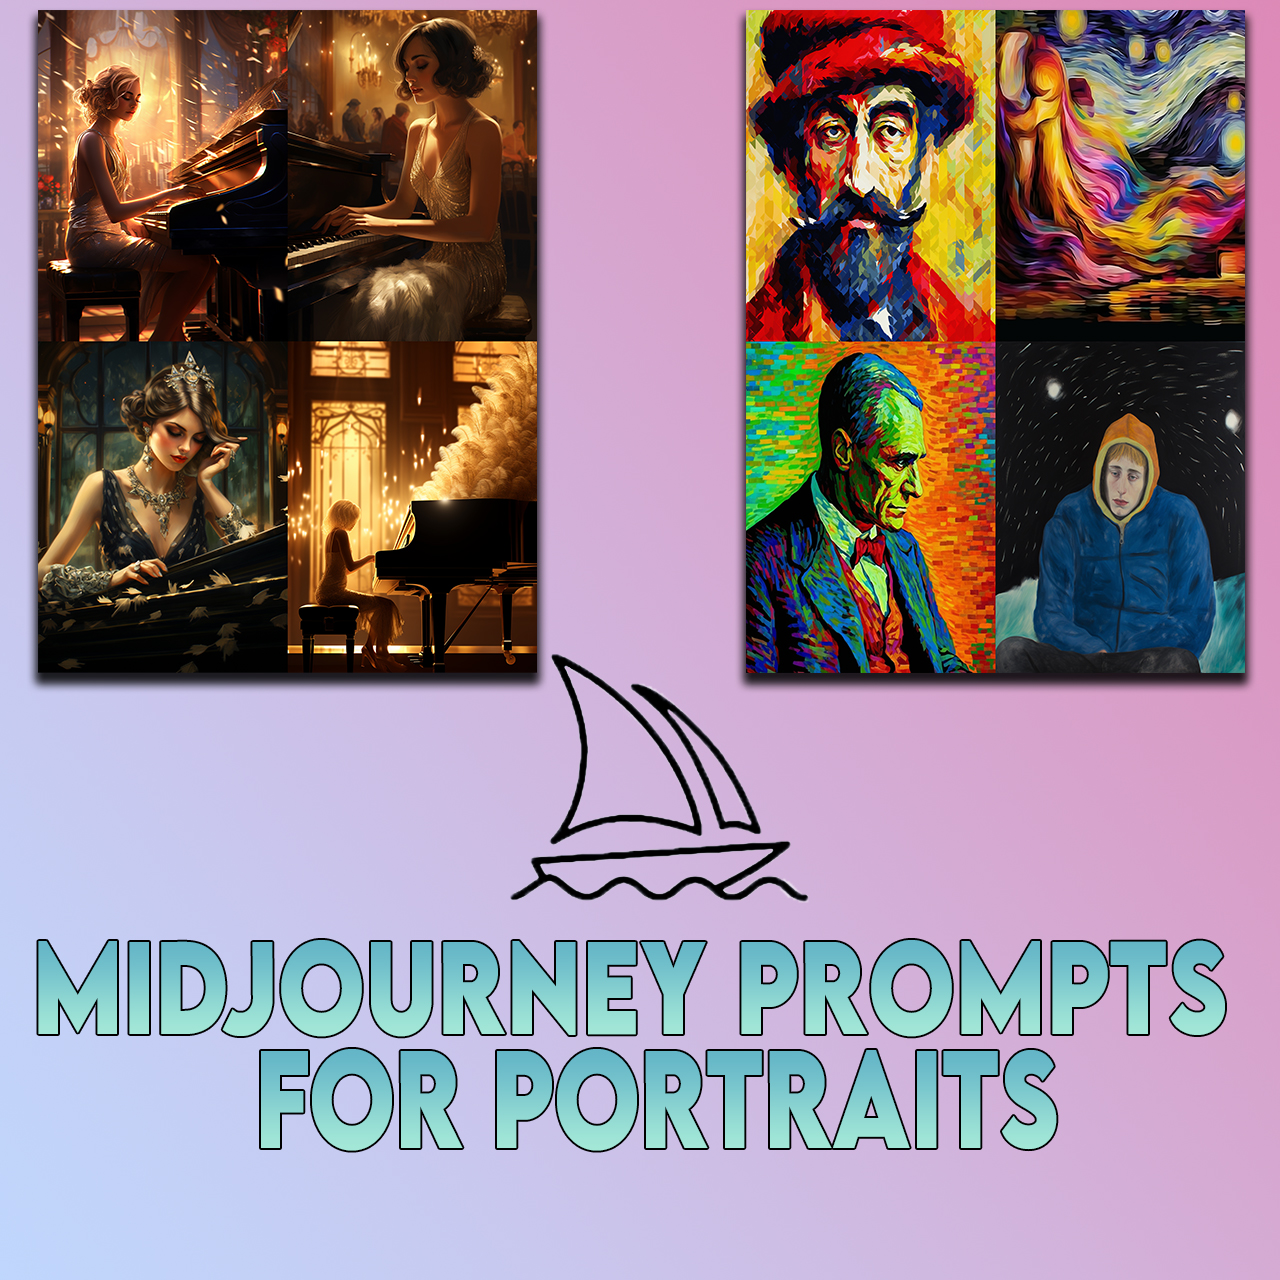 137 MIdjourney prompts for portraits